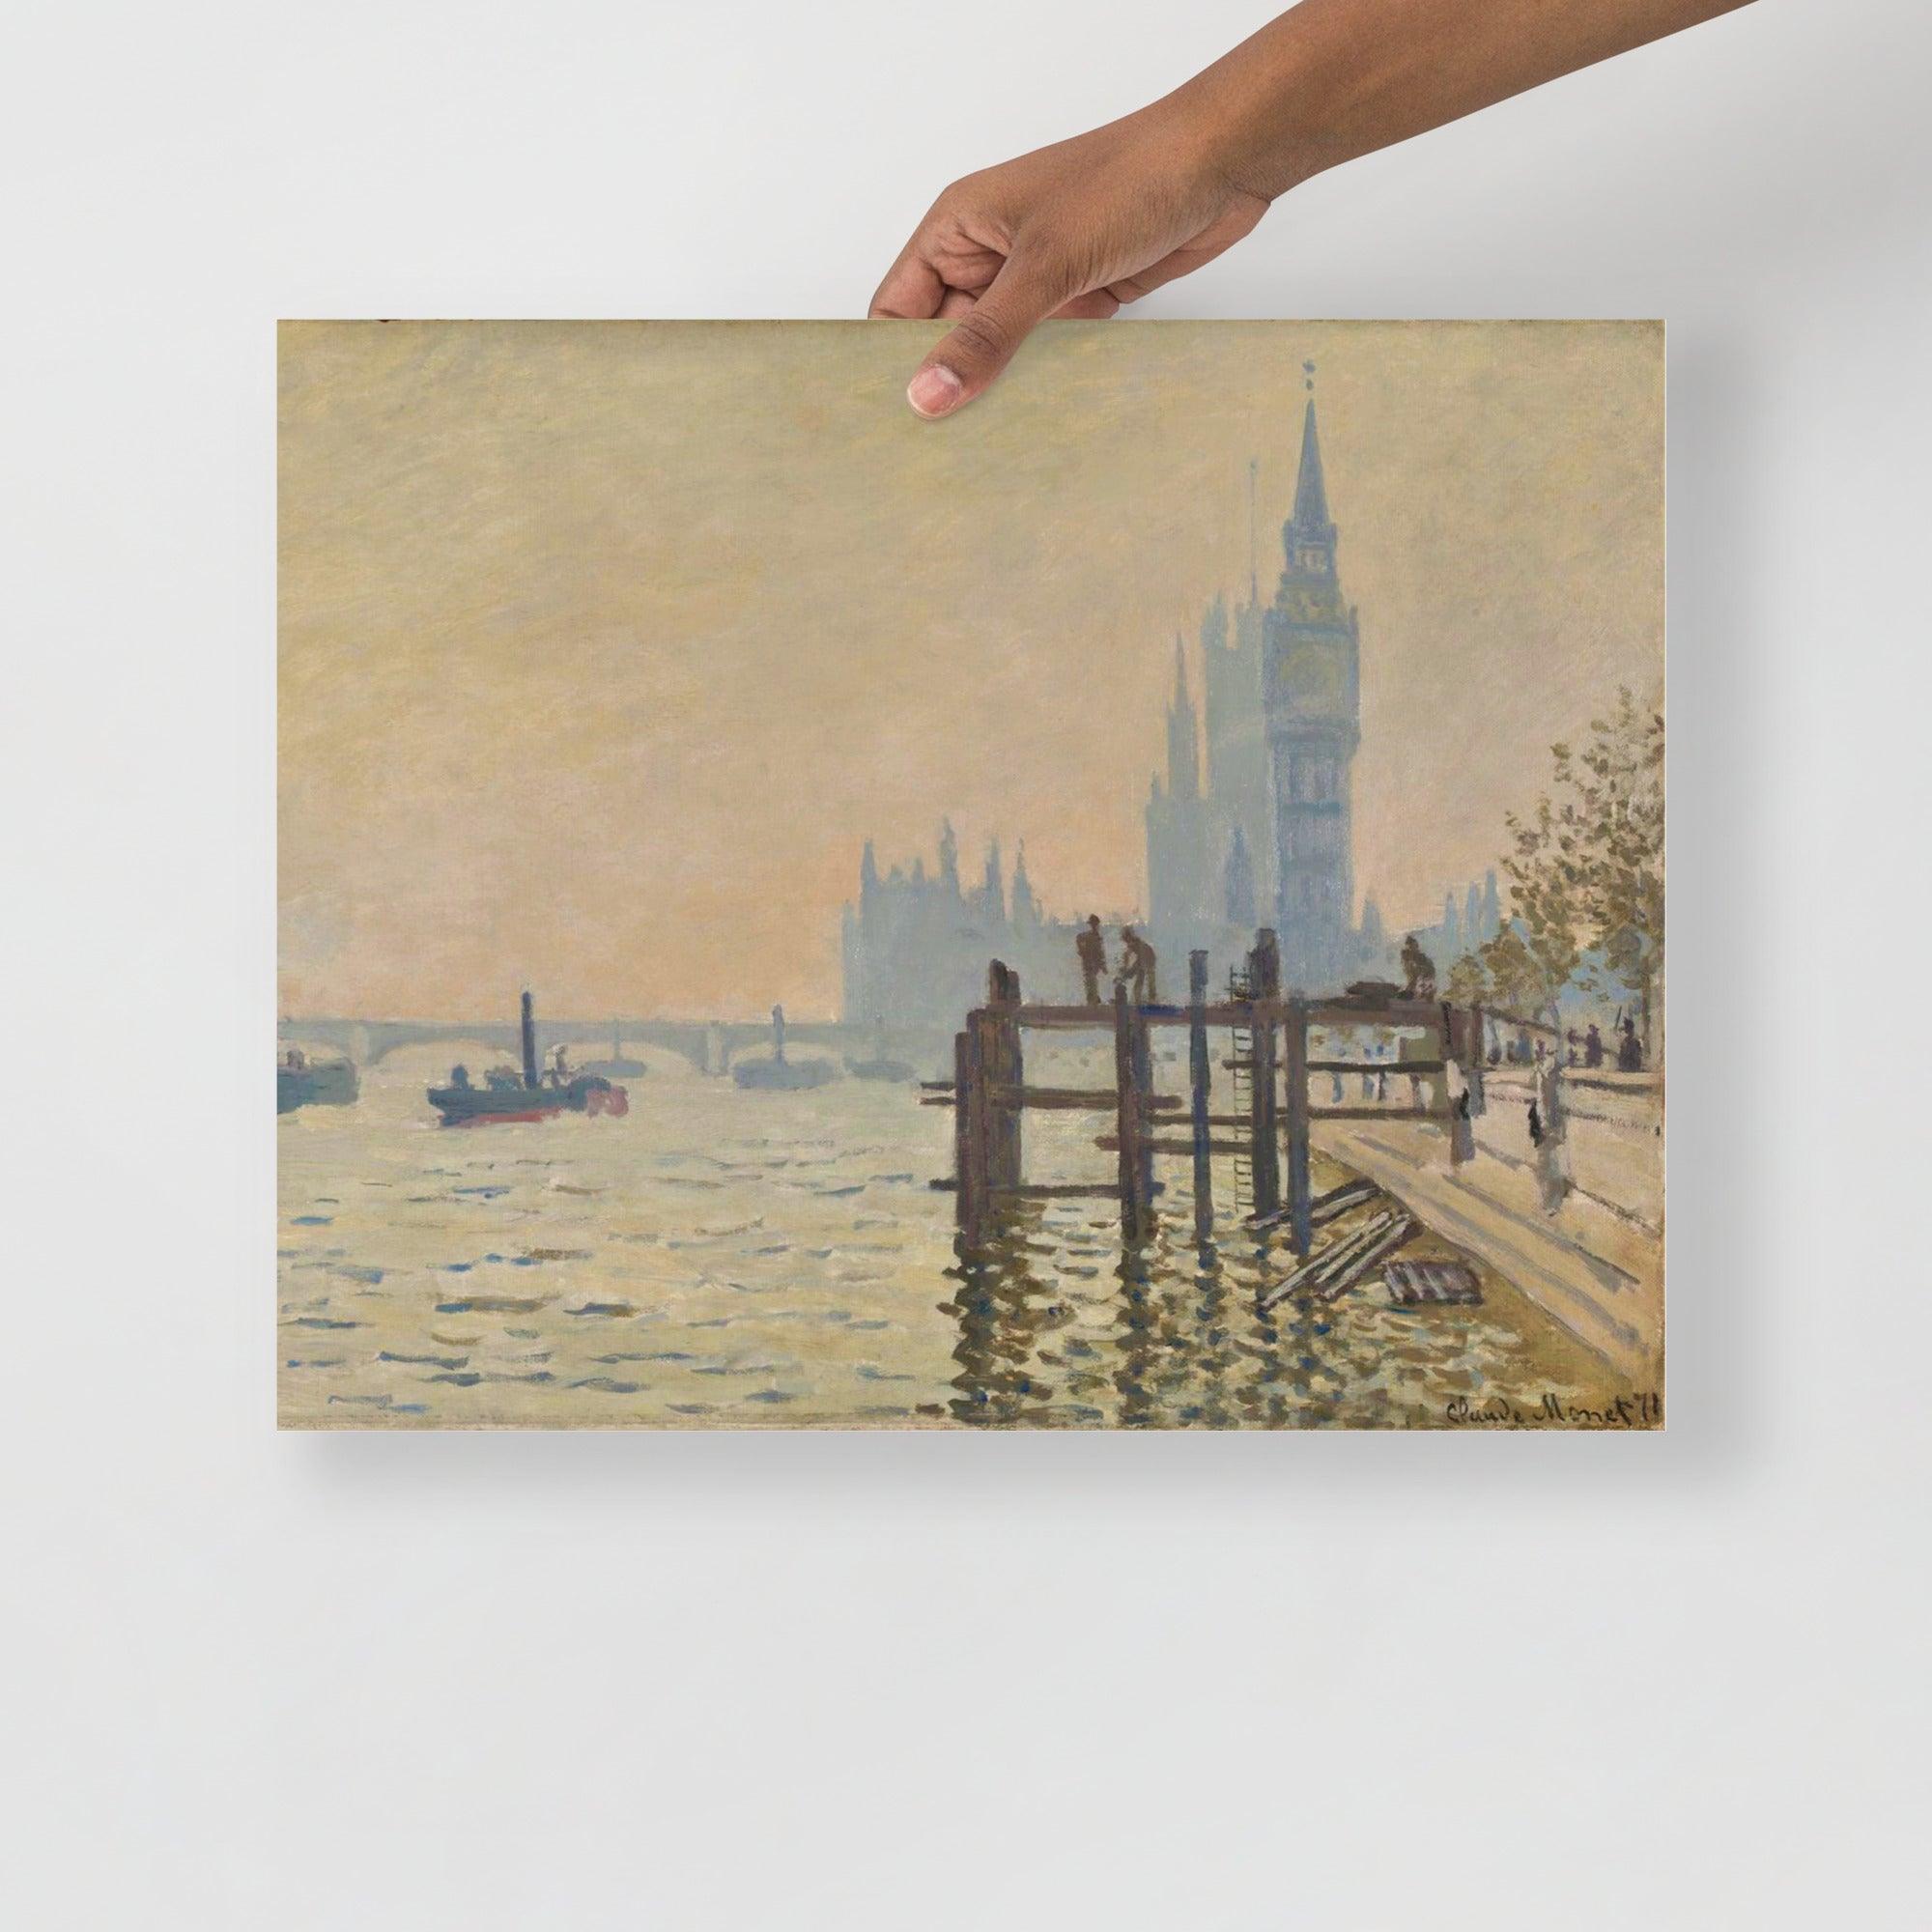 The Thames Below Water by Claude Monet poster on a plain backdrop in size 16x20”.